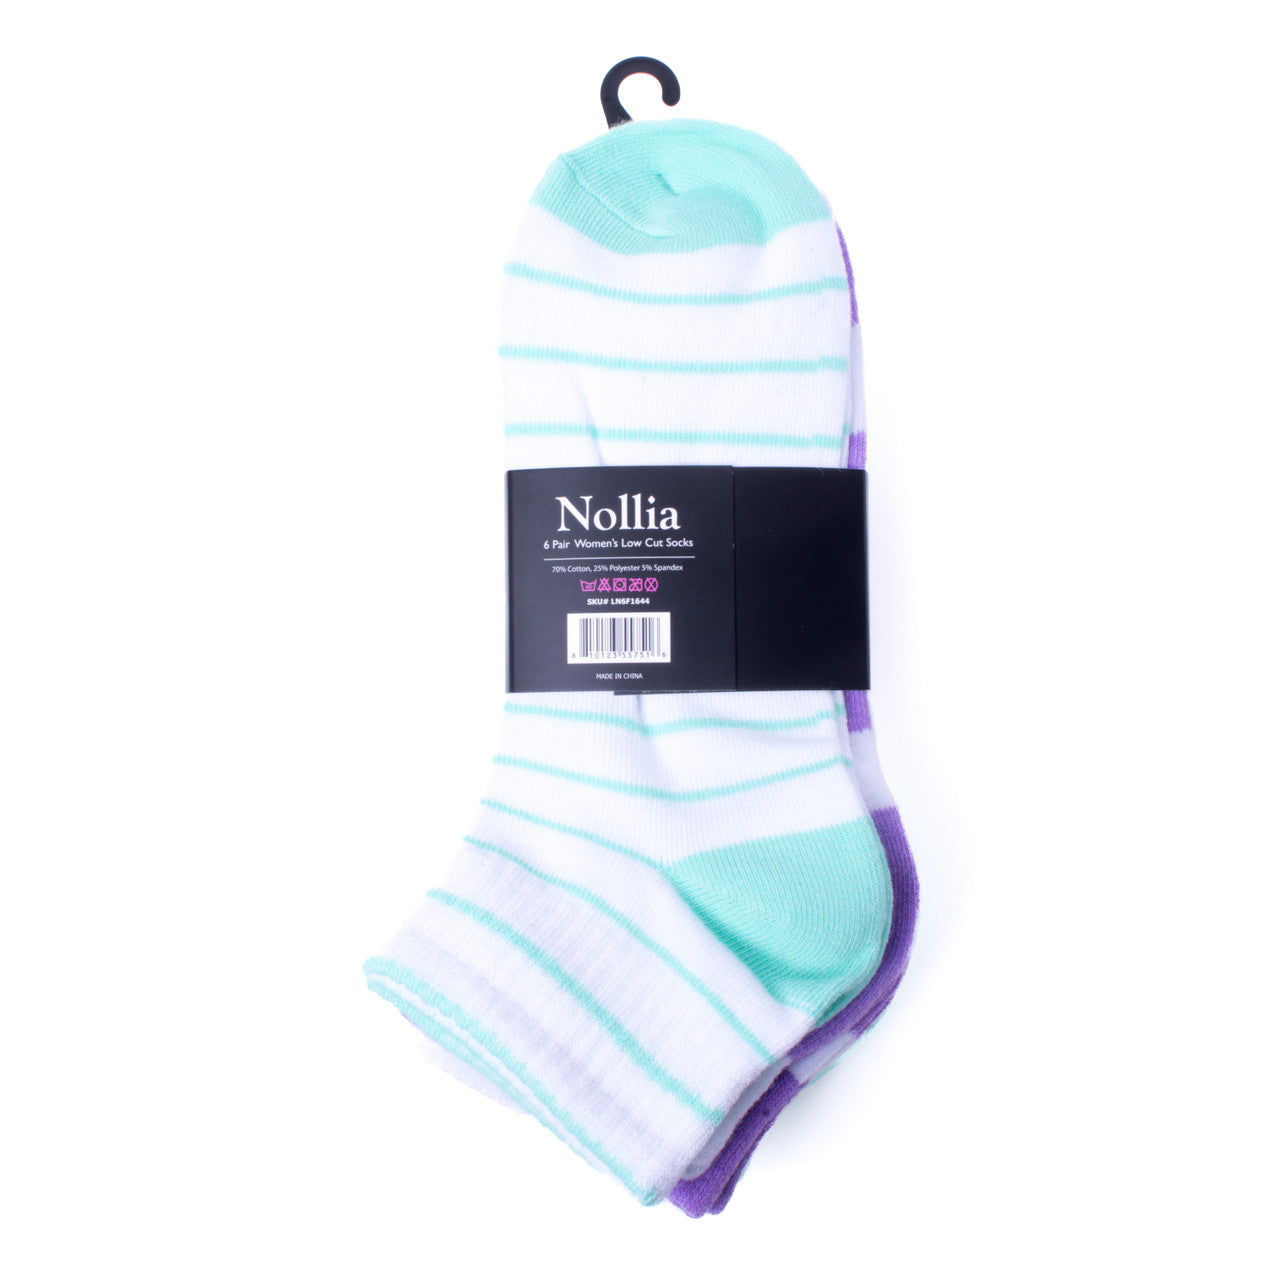 Women's Low Cut Socks Six Pairs Flower Embroidered Design Mom Gift Assorted Green Purple White Design 6 Pre Pack Ribbed Socks Ladies Socks